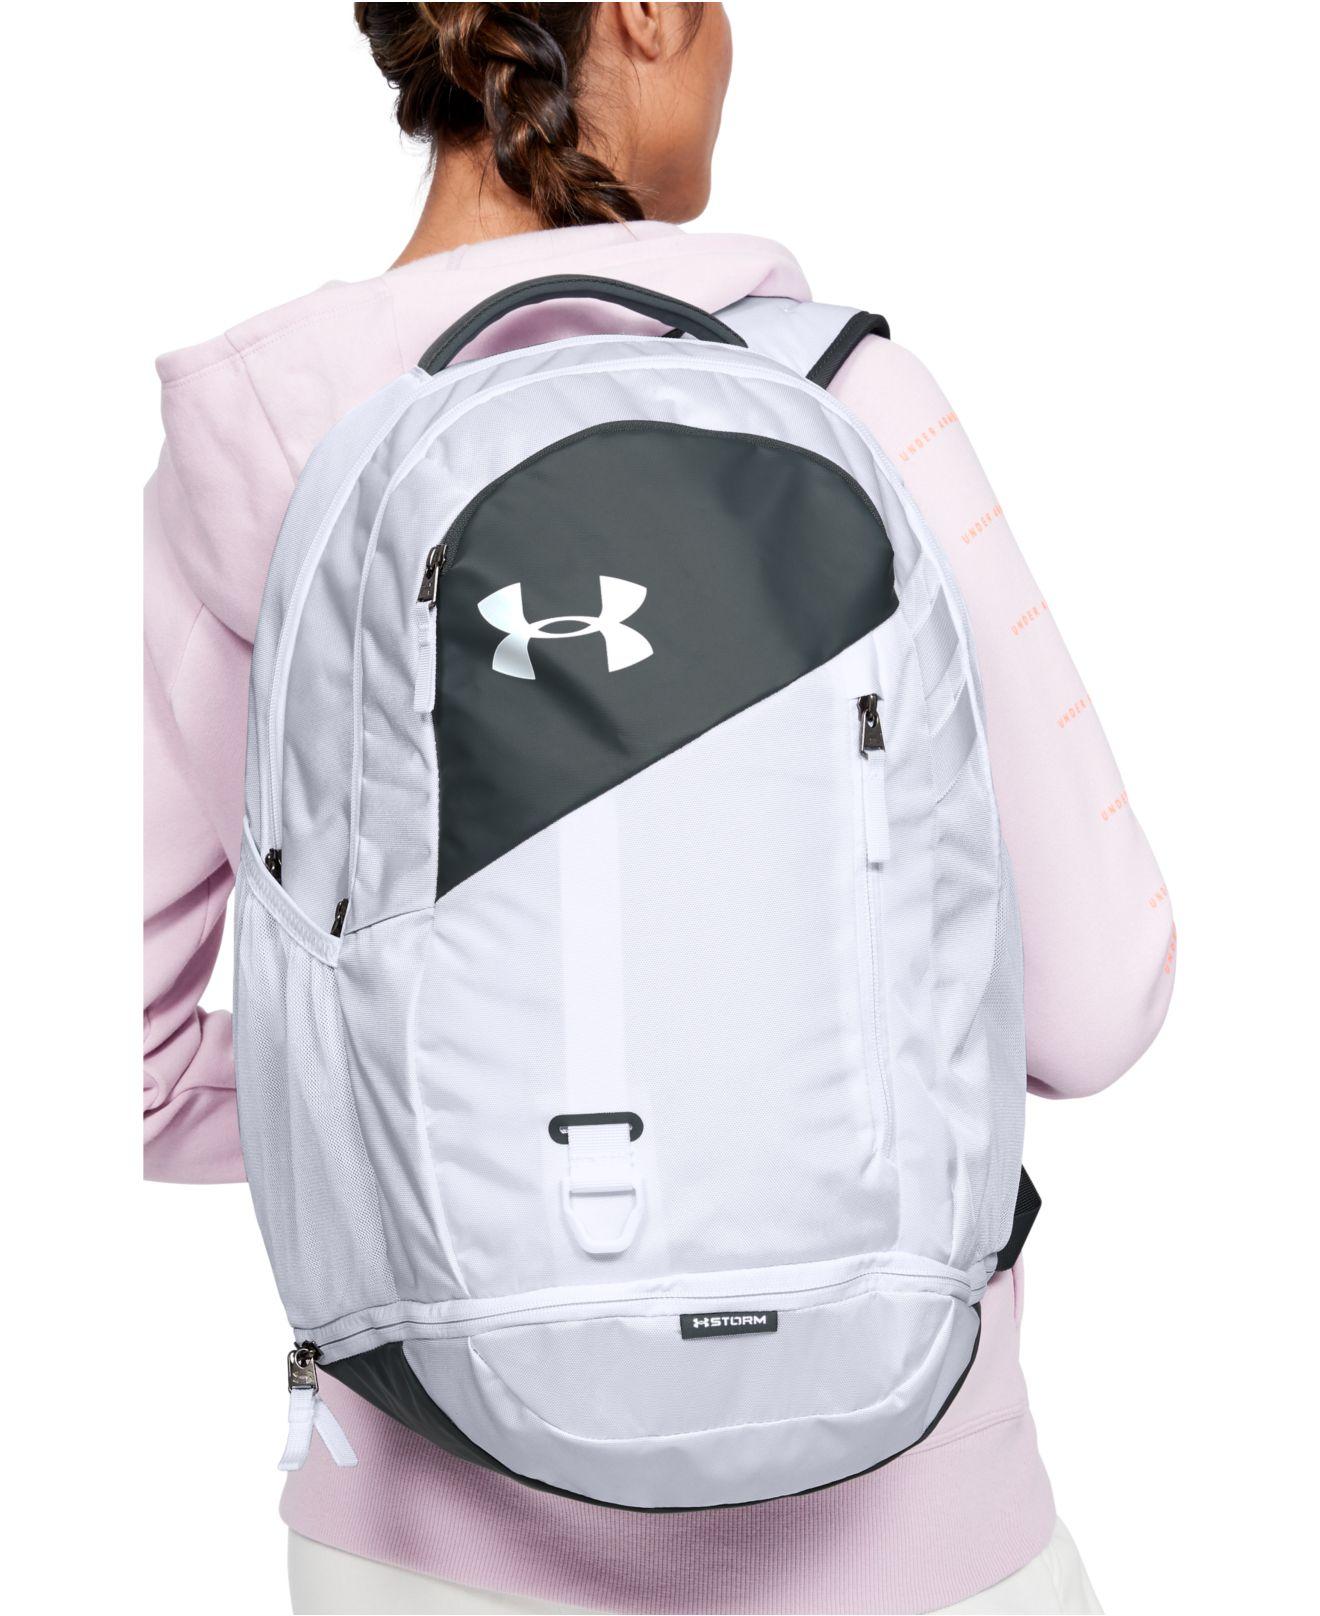 Under Armour Ua Hustle 4.0 Backpack in White | Lyst